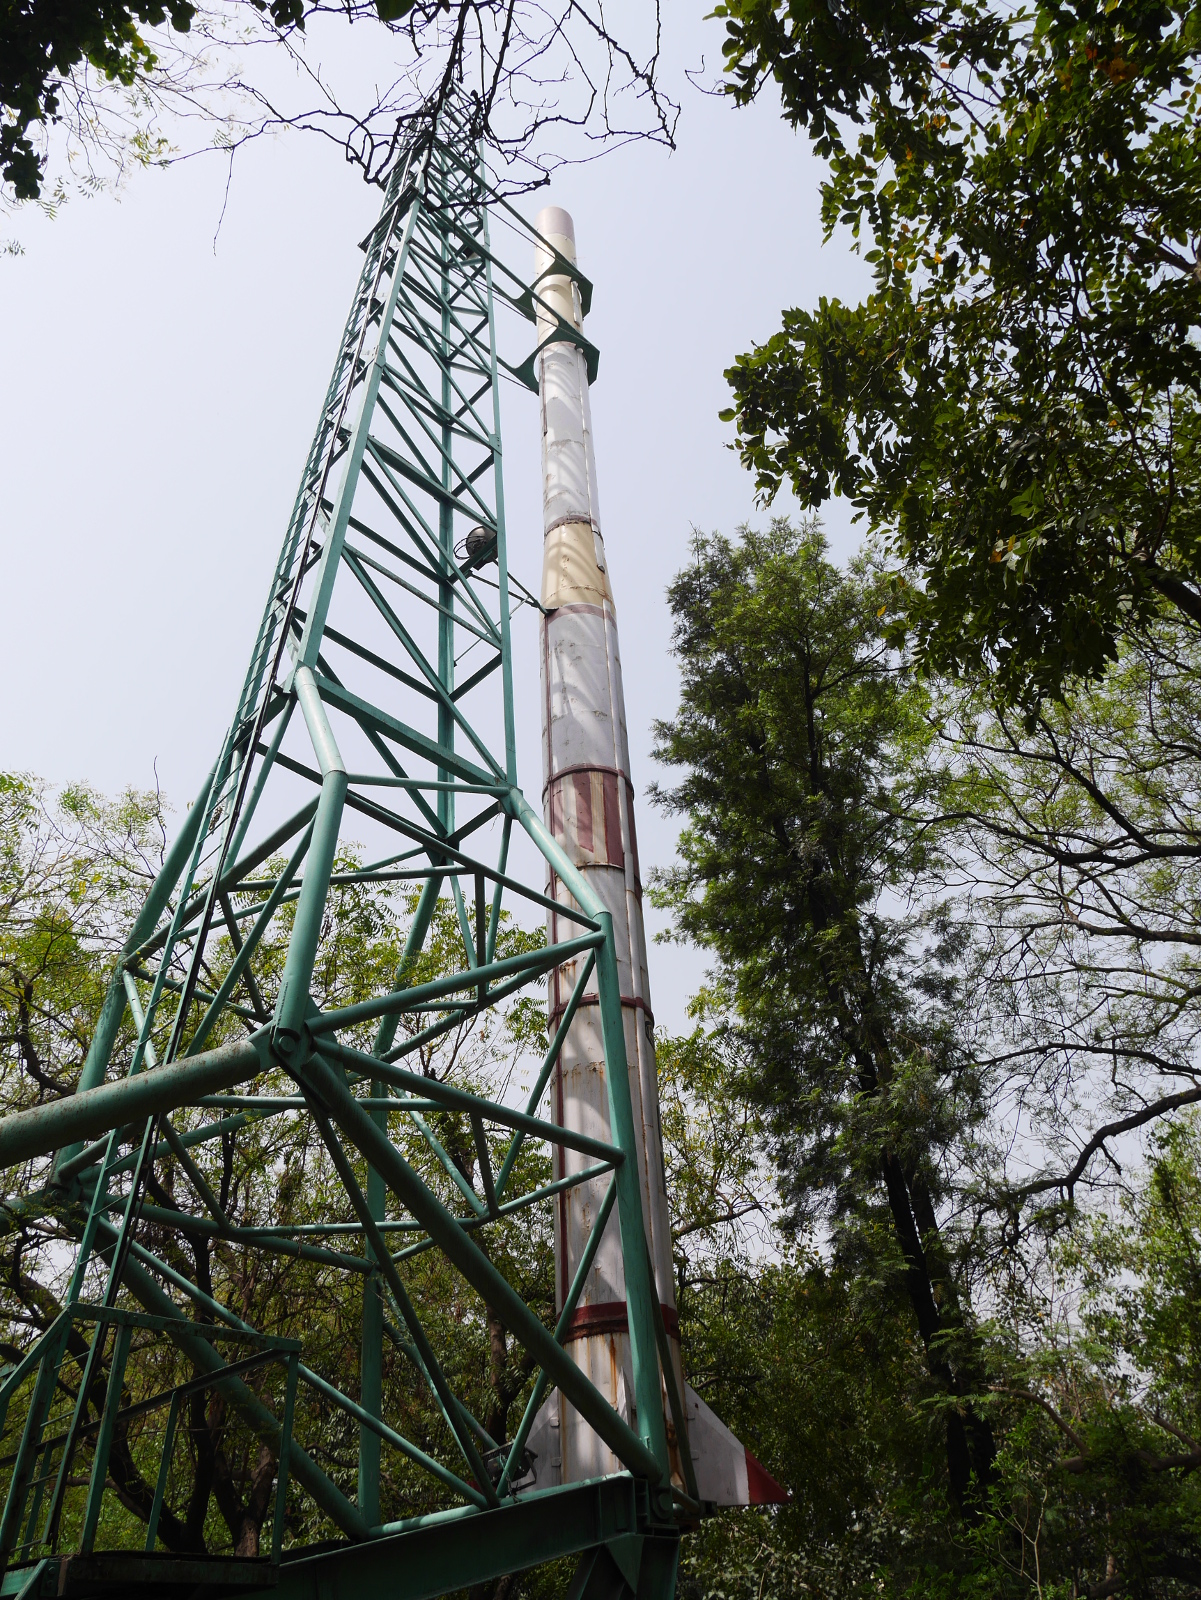 SLV-3, India's first satellite launcher, on display next to the planetarium at Teen Murti.